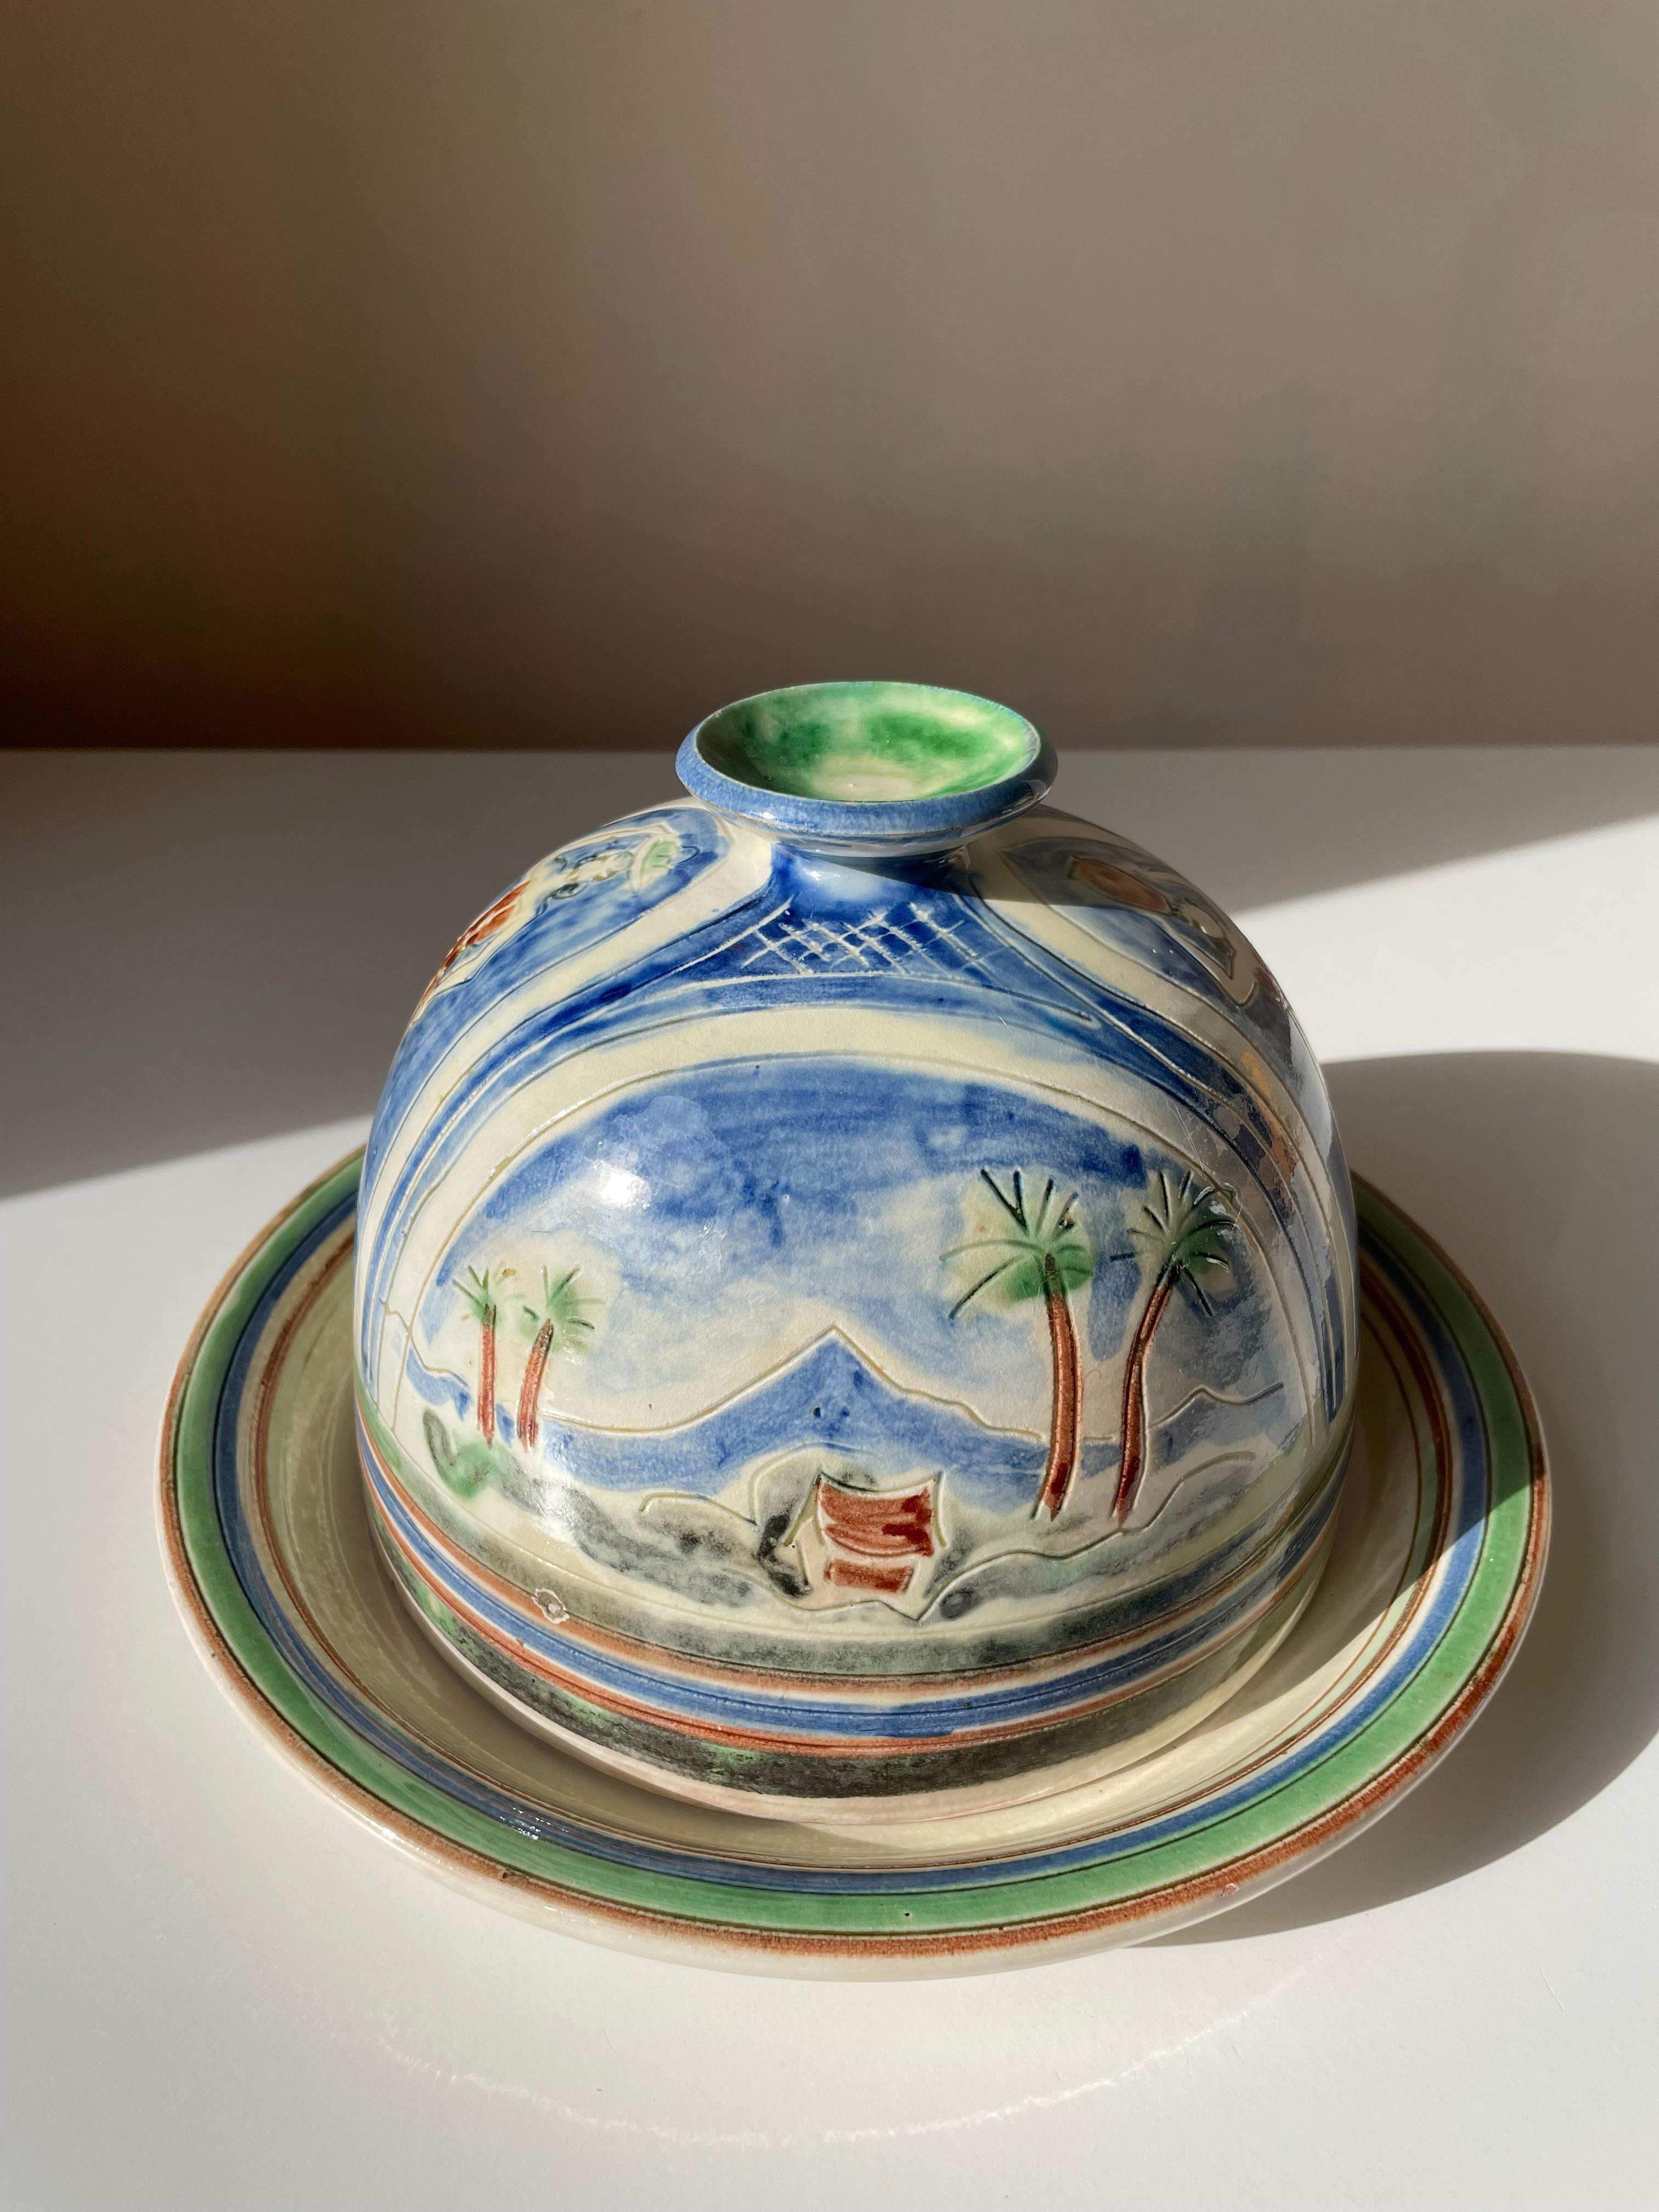 Decorative vintage Danish midcentury modern handmade ceramic lidded plate / cheese dome in warm brown, blue and green colors. Hand-painted women, mountain landscapes, small houses and palm tree decor on cream yellow background with green and blue